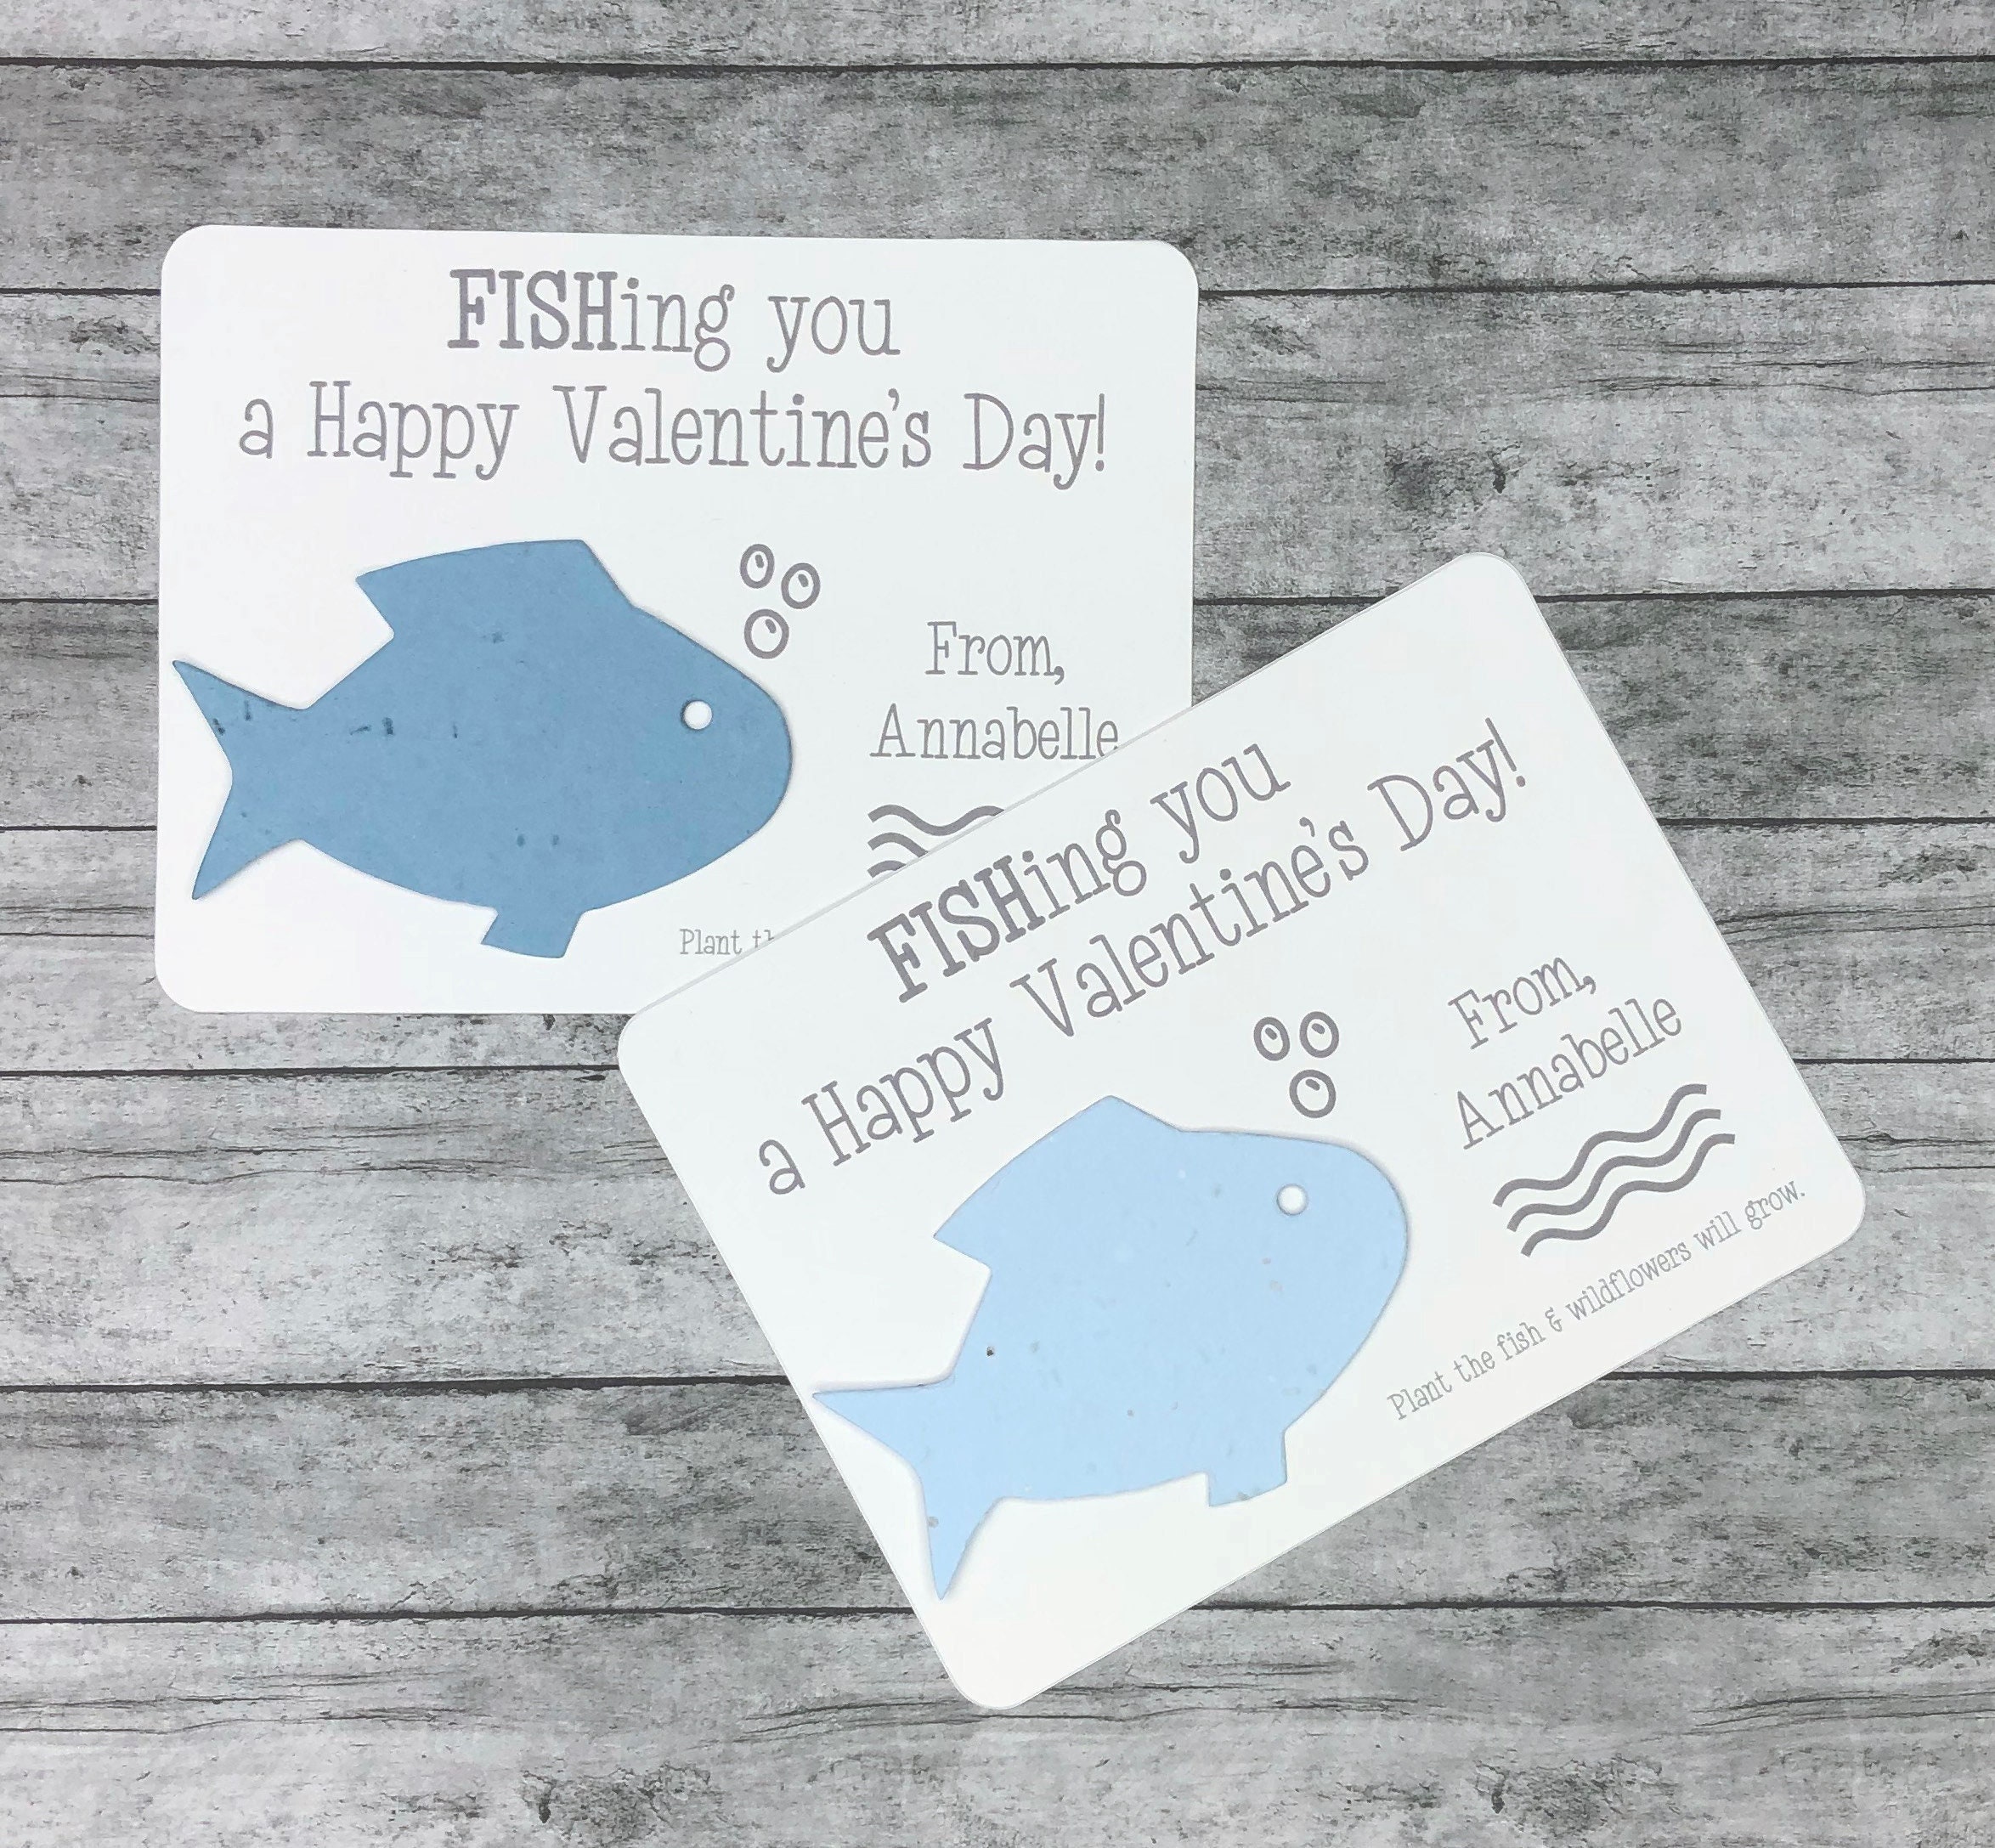 Fishing You a Happy Valentine's Day Plantable Seed Recycled Paper Favor  Cards set of 12 Eco-friendly Valentine's Day Fish Theme 